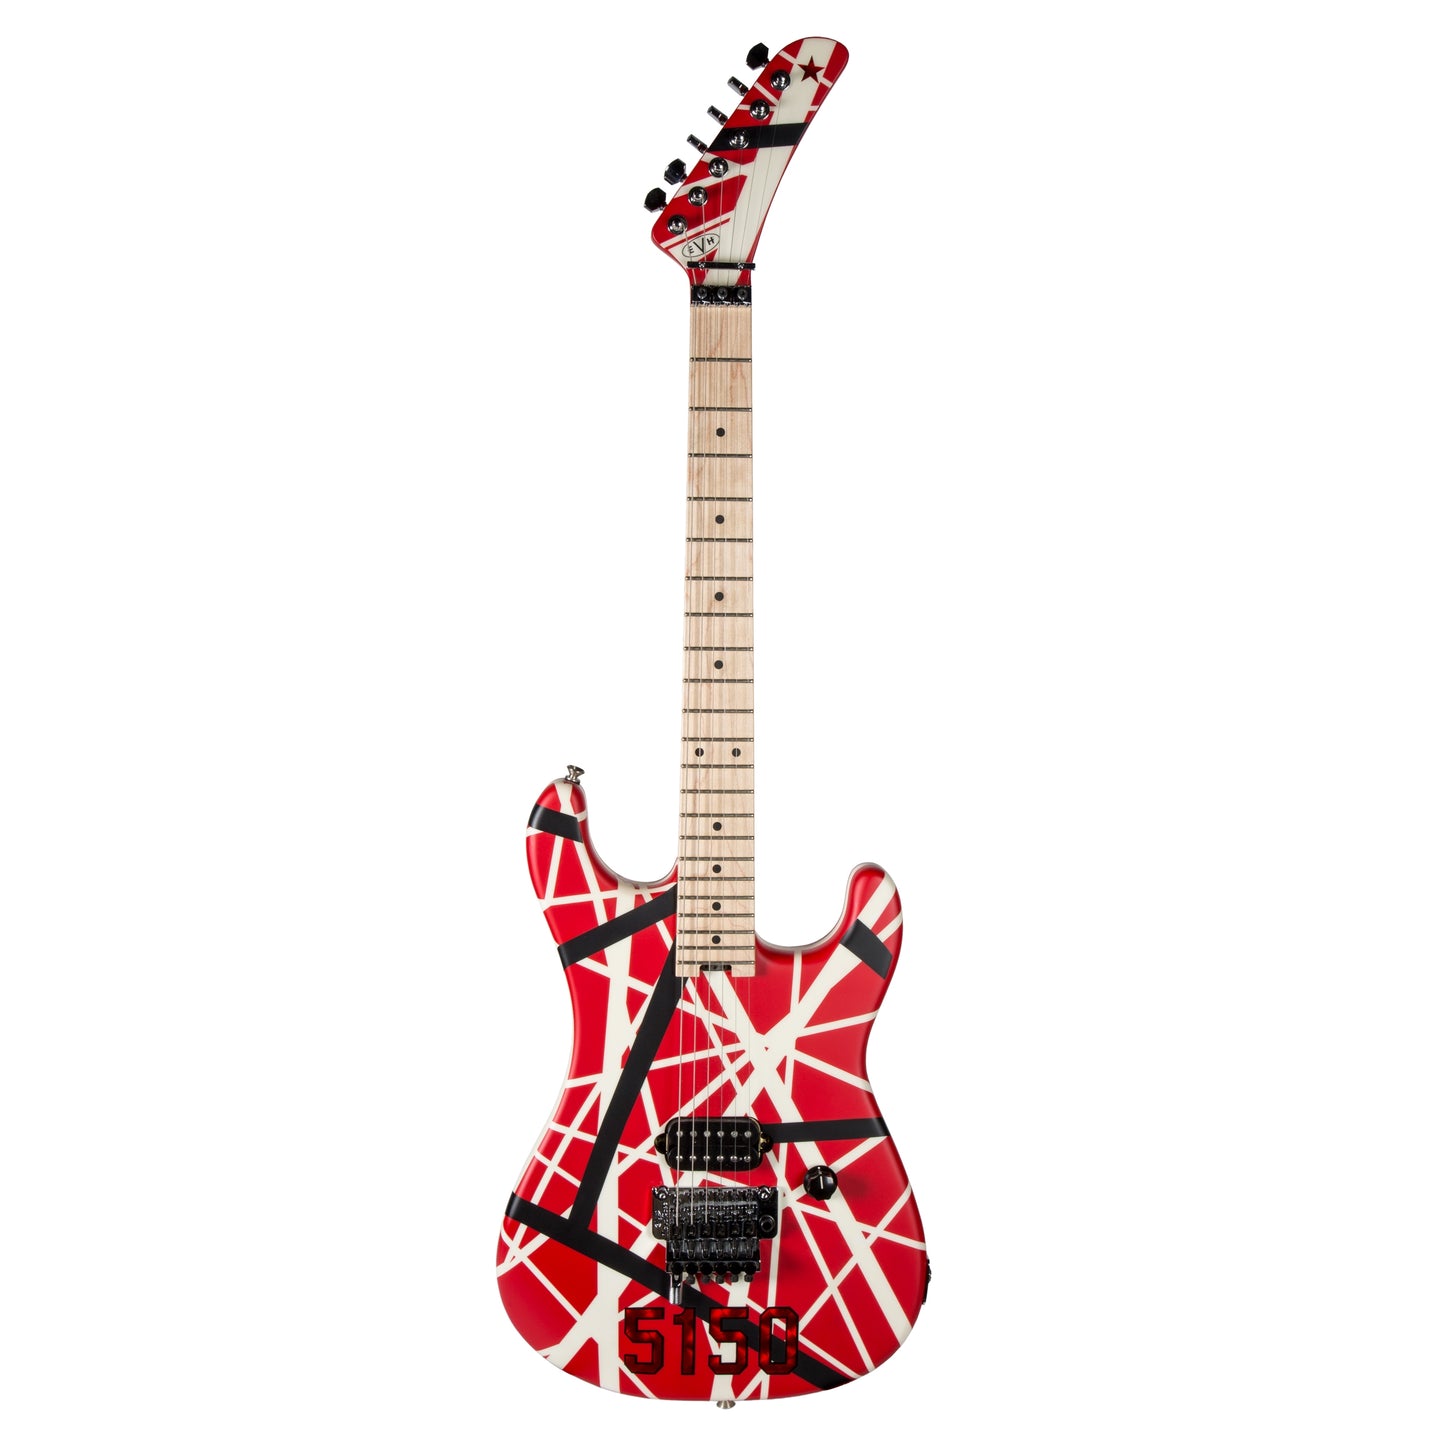 EVH Striped Series 5150® Electric Guitar - Red, Black and White Stripes